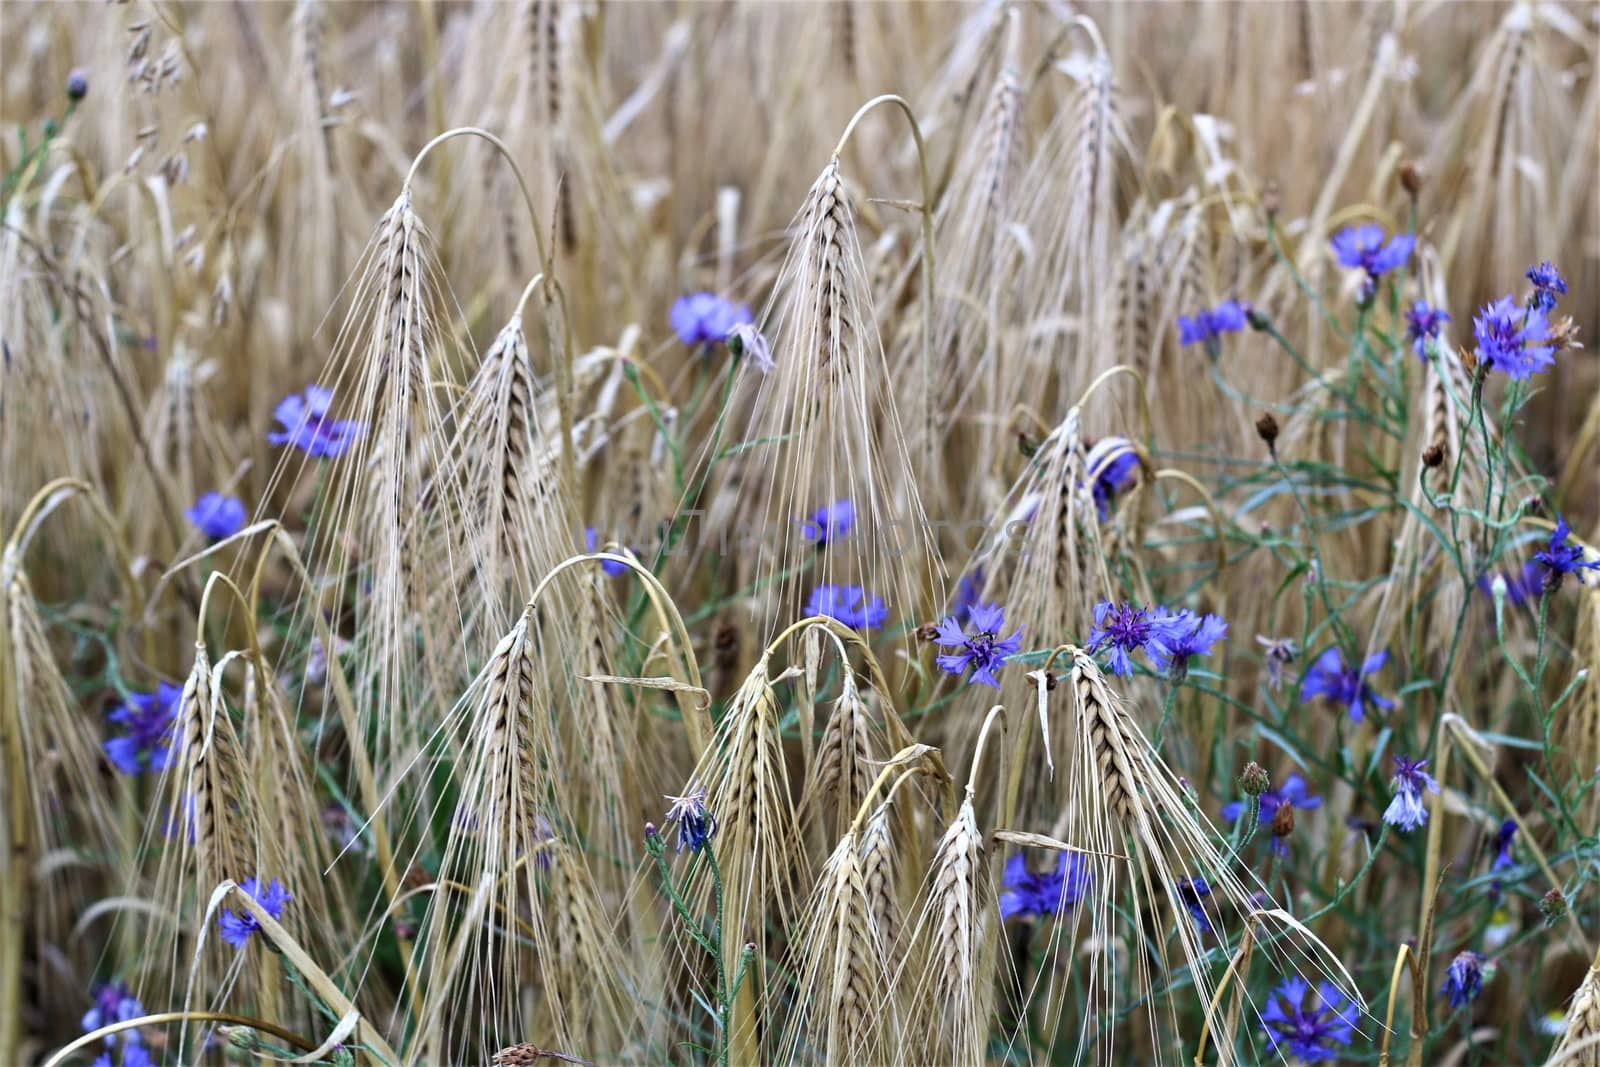 blue cornflowers between ripe cereals in the field by Luise123